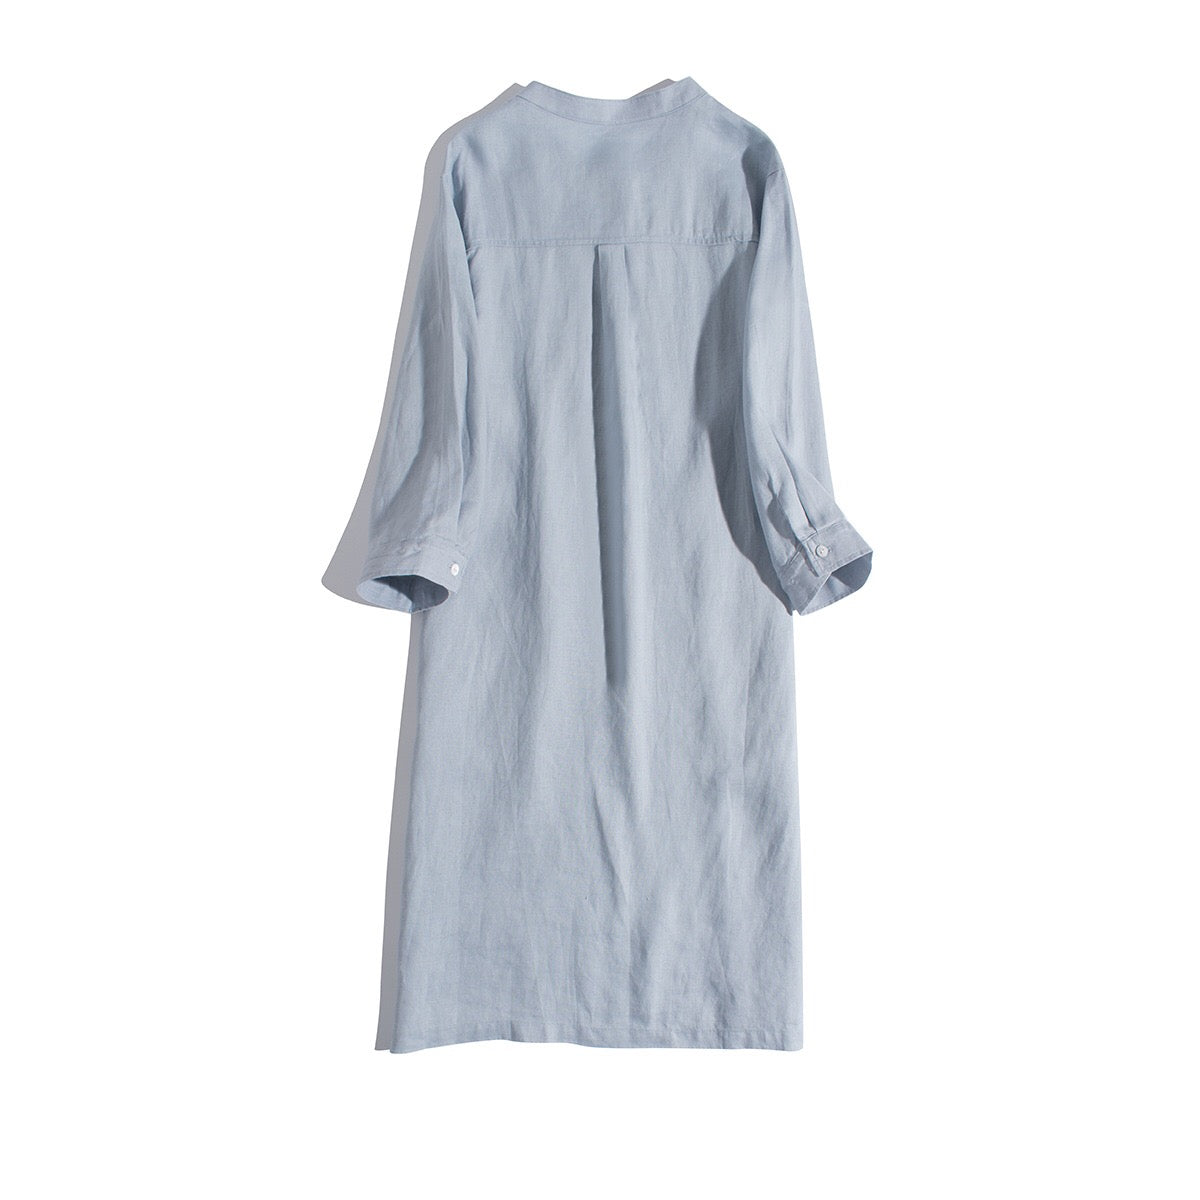 Wildberry Orchard 100% Linen Dress | Hypoallergenic - Allergy Friendly - Naturally Free